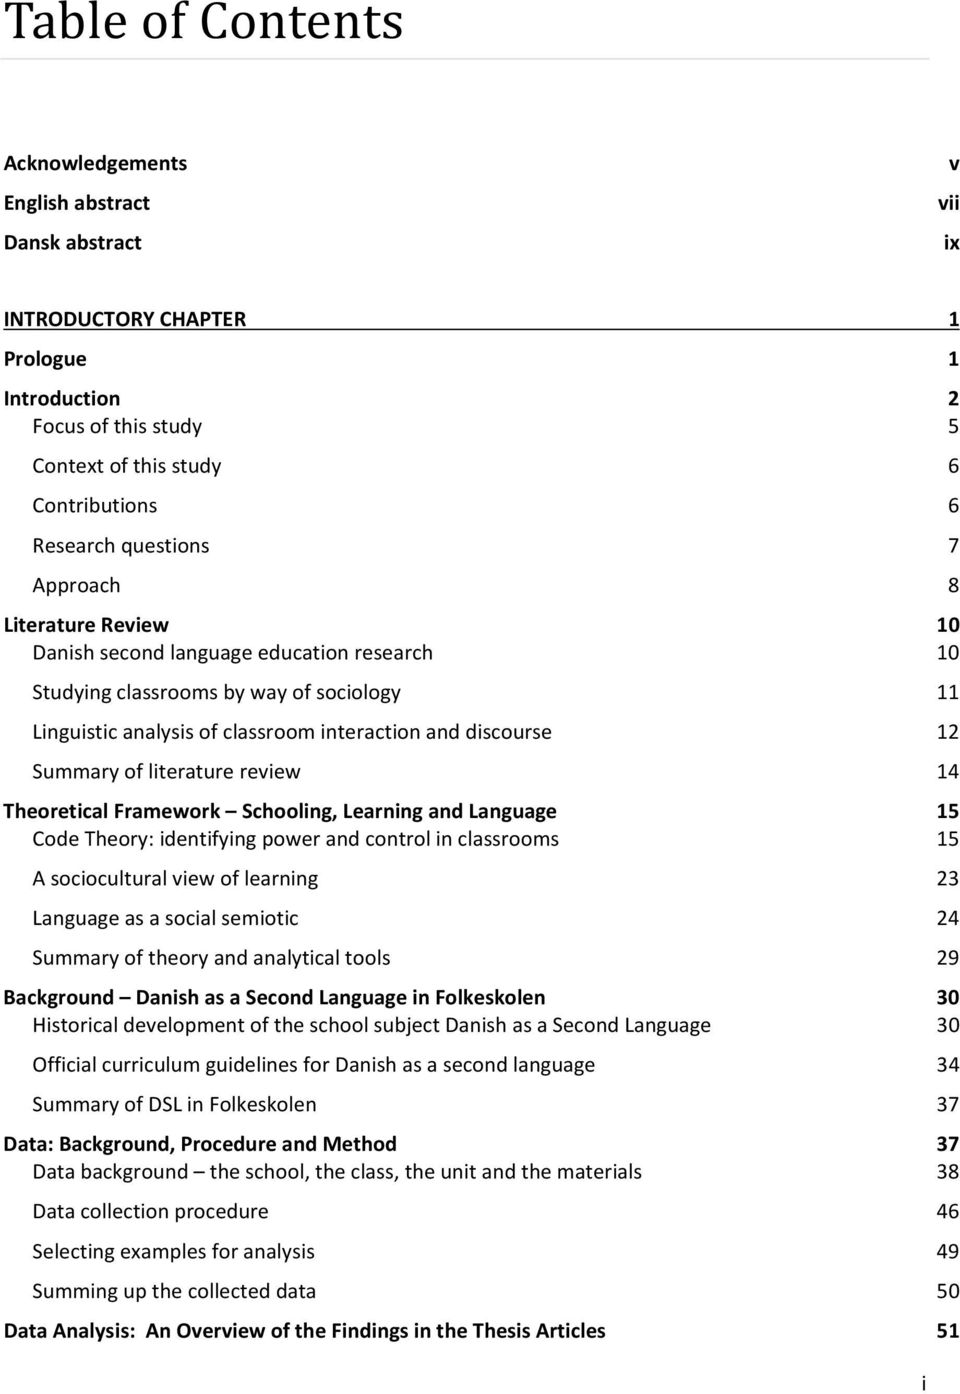 Summary of literature review 14 Theoretical Framework Schooling, Learning and Language 15 Code Theory: identifying power and control in classrooms 15 A sociocultural view of learning 23 Language as a